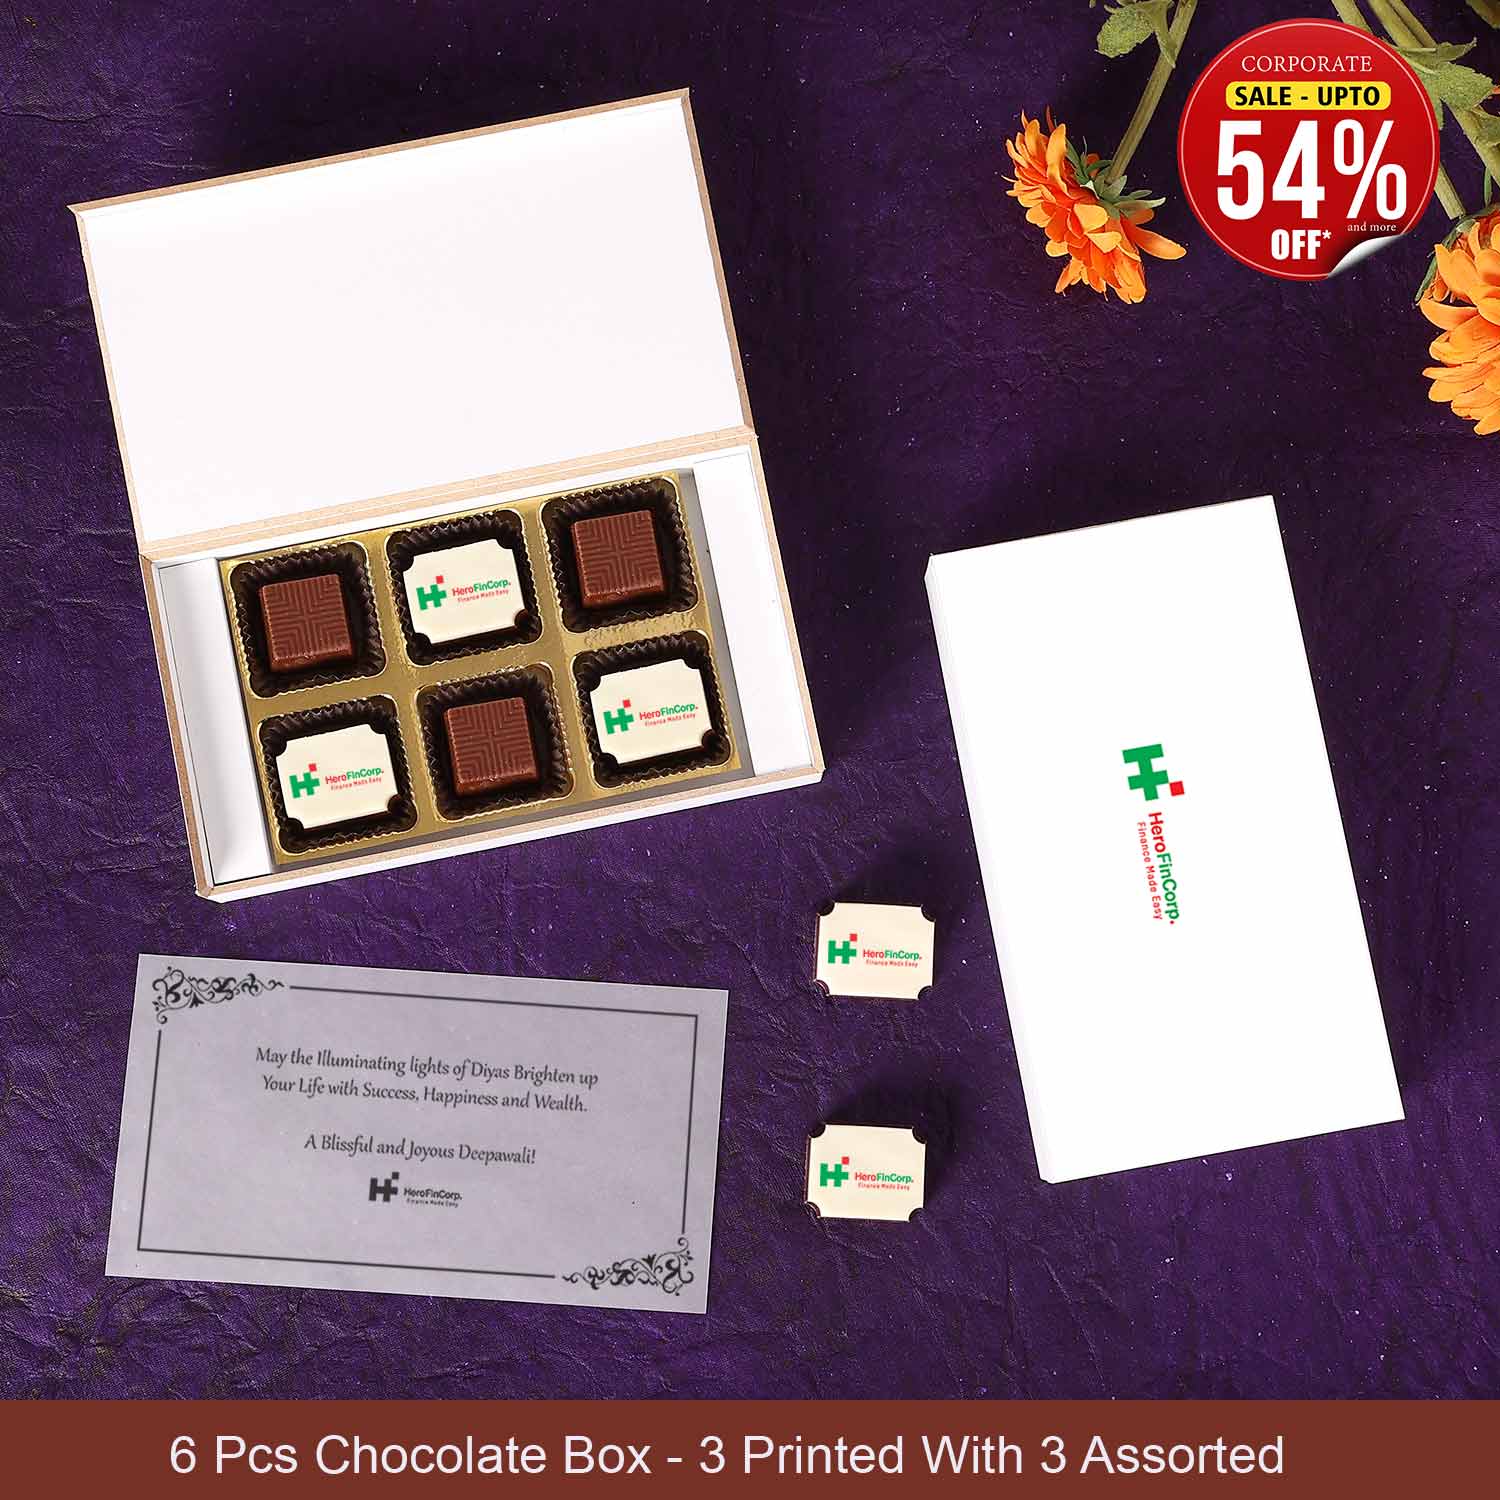  Corporate Chocolate Gift Ideas corporateevents  promotion  promotionalproducts  promotionalmerchandise  events  eventmanagement  eventmarketing  eventagency  brandbuilding  brandpromotion